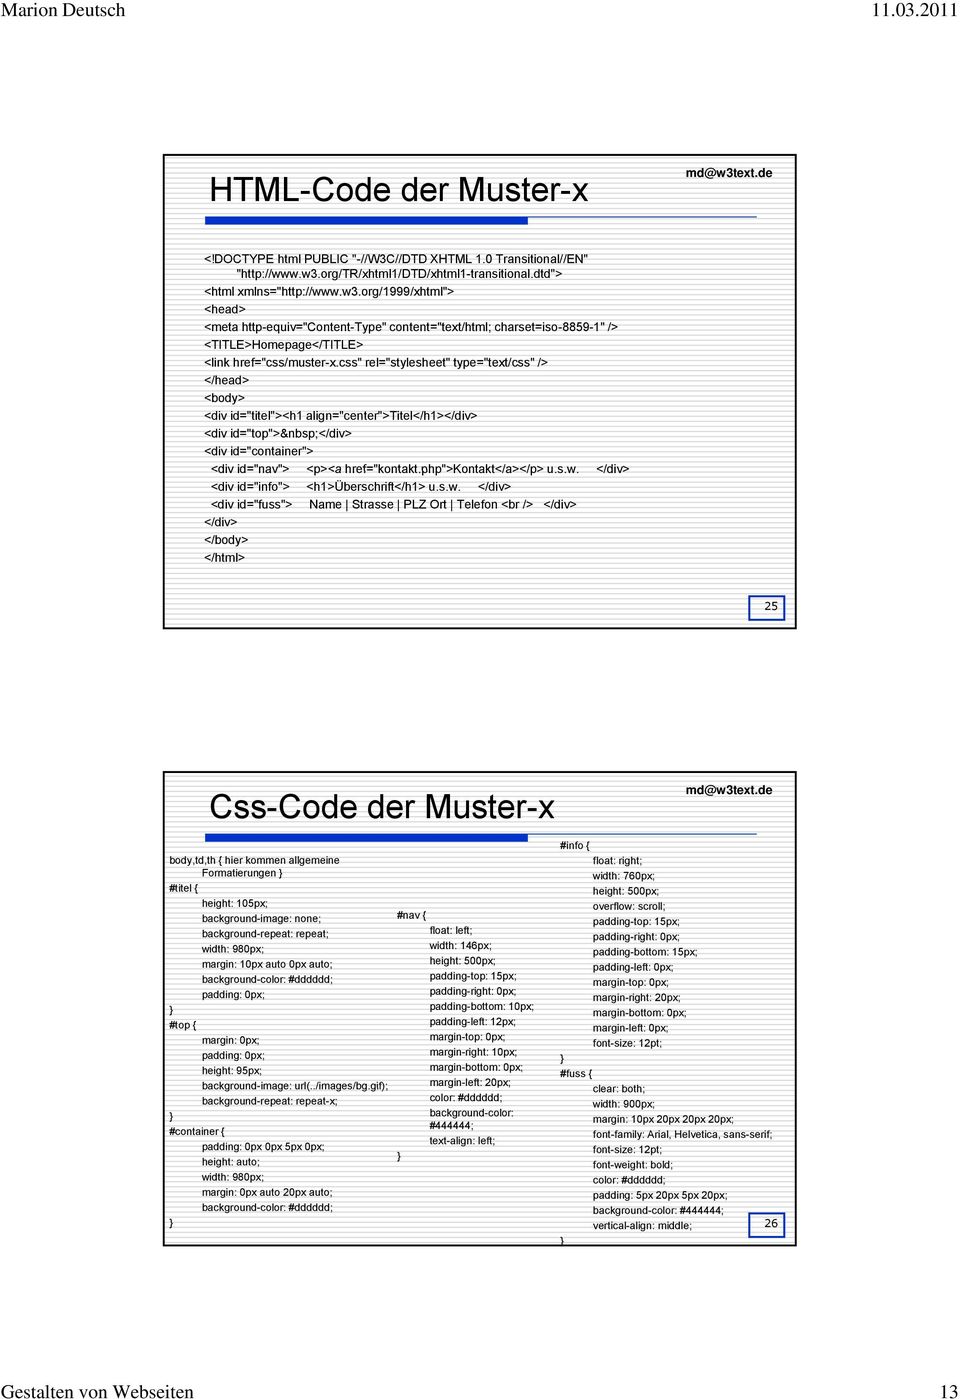 org/1999/xhtml"> <head> <meta http-equiv="content-type" content="text/html; charset=iso-8859-1" /> <TITLE>Homepage</TITLE> <link href="css/muster-x.